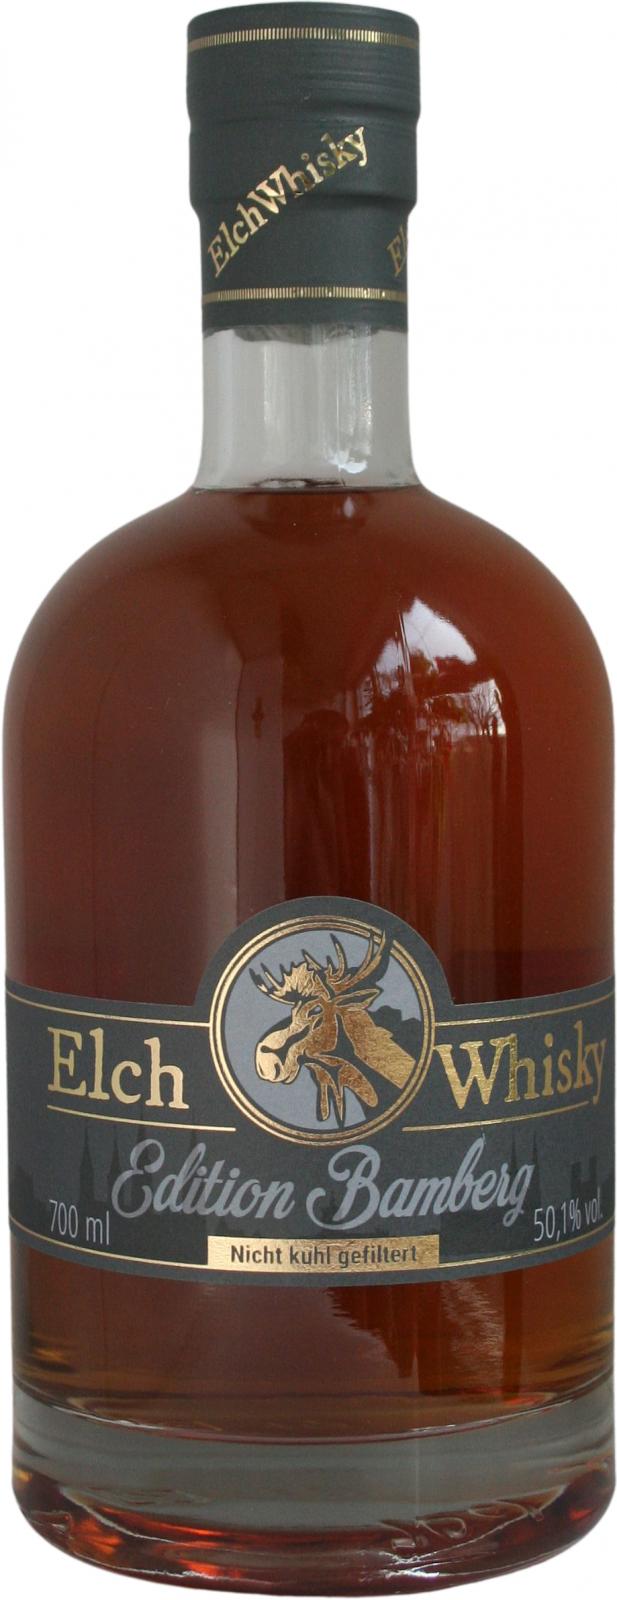 Elch Whisky Edition Bamberg Limited Edition 2 Bourbon Alligator Los 20/16 50.1% 700ml